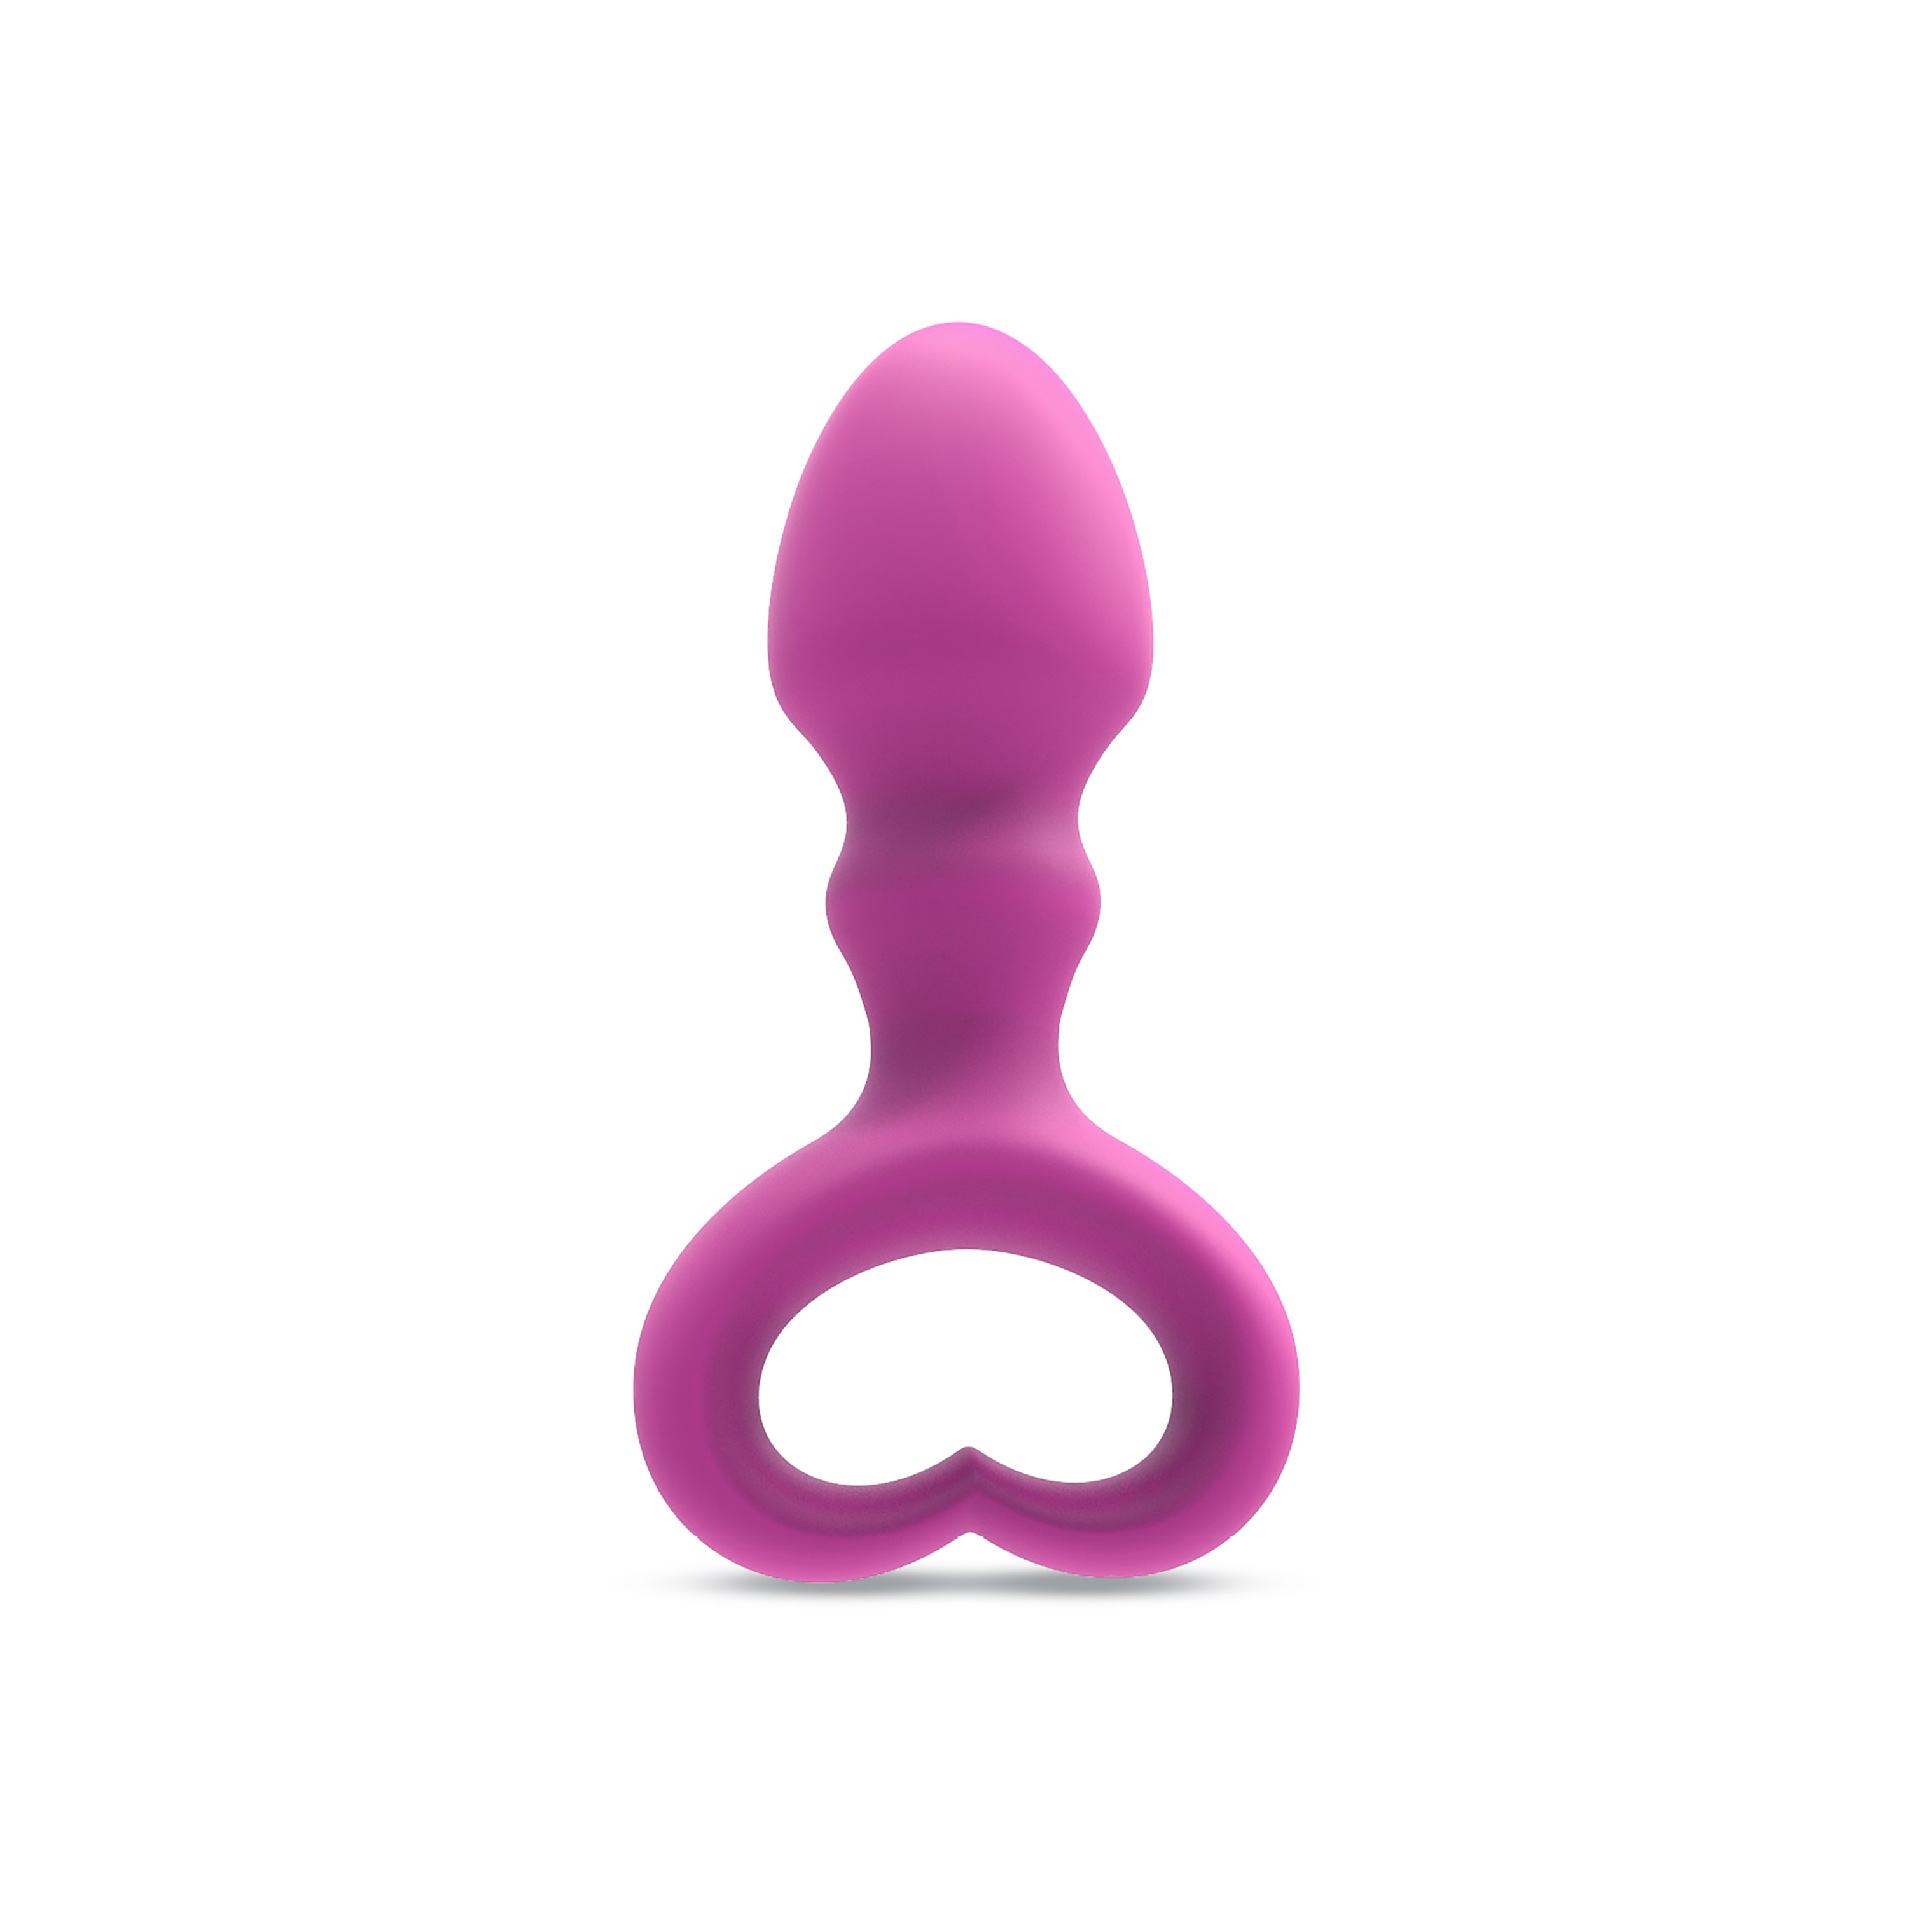 Silicone Heart Booty Plug - Soft & Easy to Use!